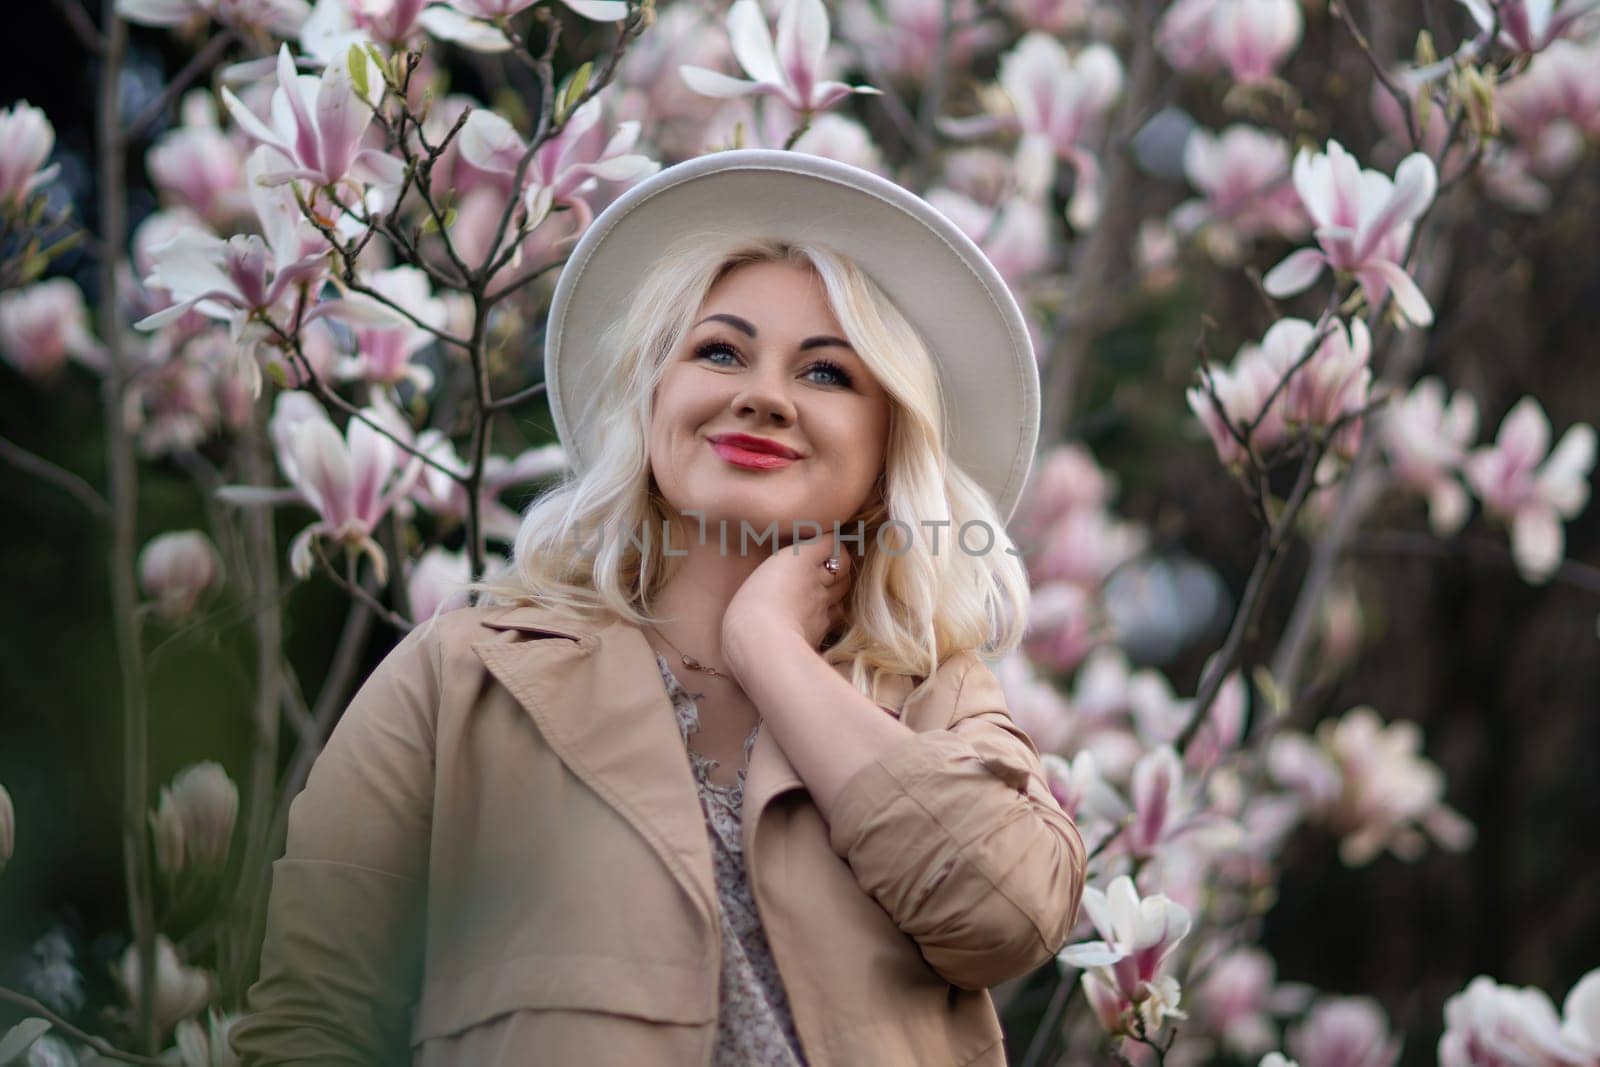 Magnolia flowers woman. A blonde woman wearing a hat stands in front of a tree with pink magnolia flowers. She is wearing a tan coat and a dress. by Matiunina